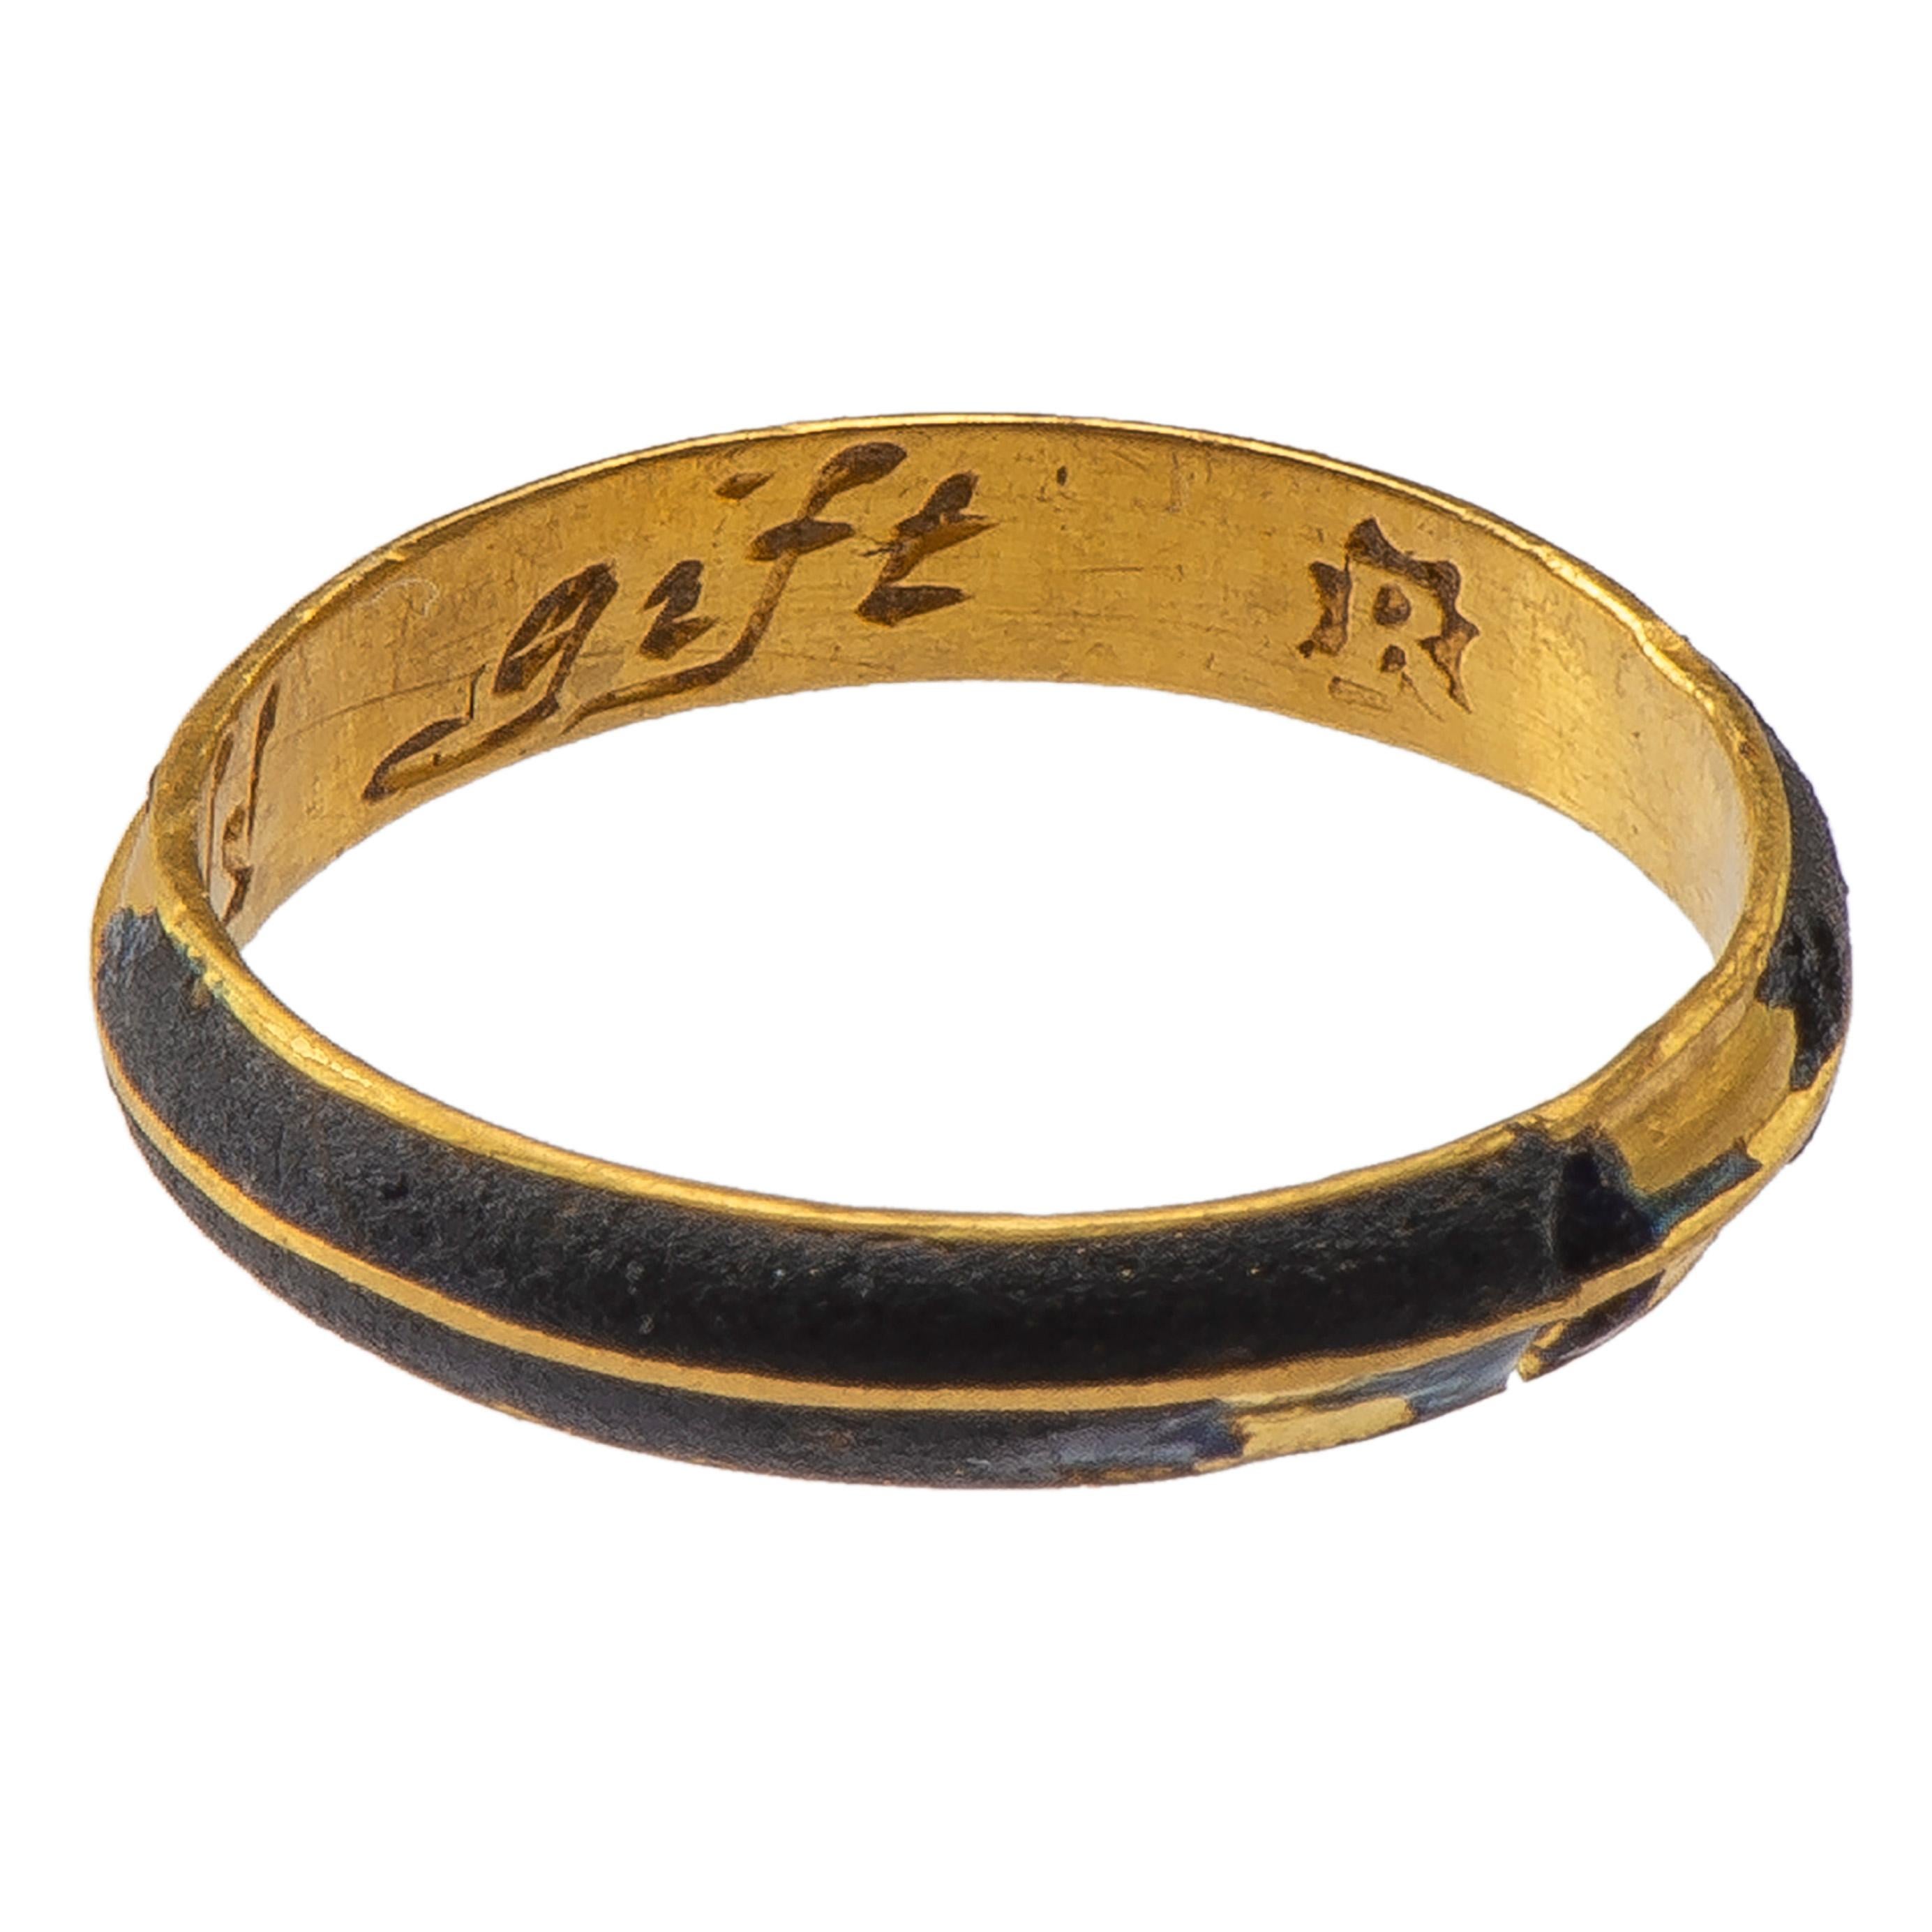 Posy Ring “A frend’s gift”
England, late 17th-early 18th century
Gold, enamel
Weight 1.4 gr; Circumference 44.77 mm; US size 3 ¼ ; UK size F ¾

A charming inscription in elegant italic script with unusual dark blue enamel surrounding the band.

The